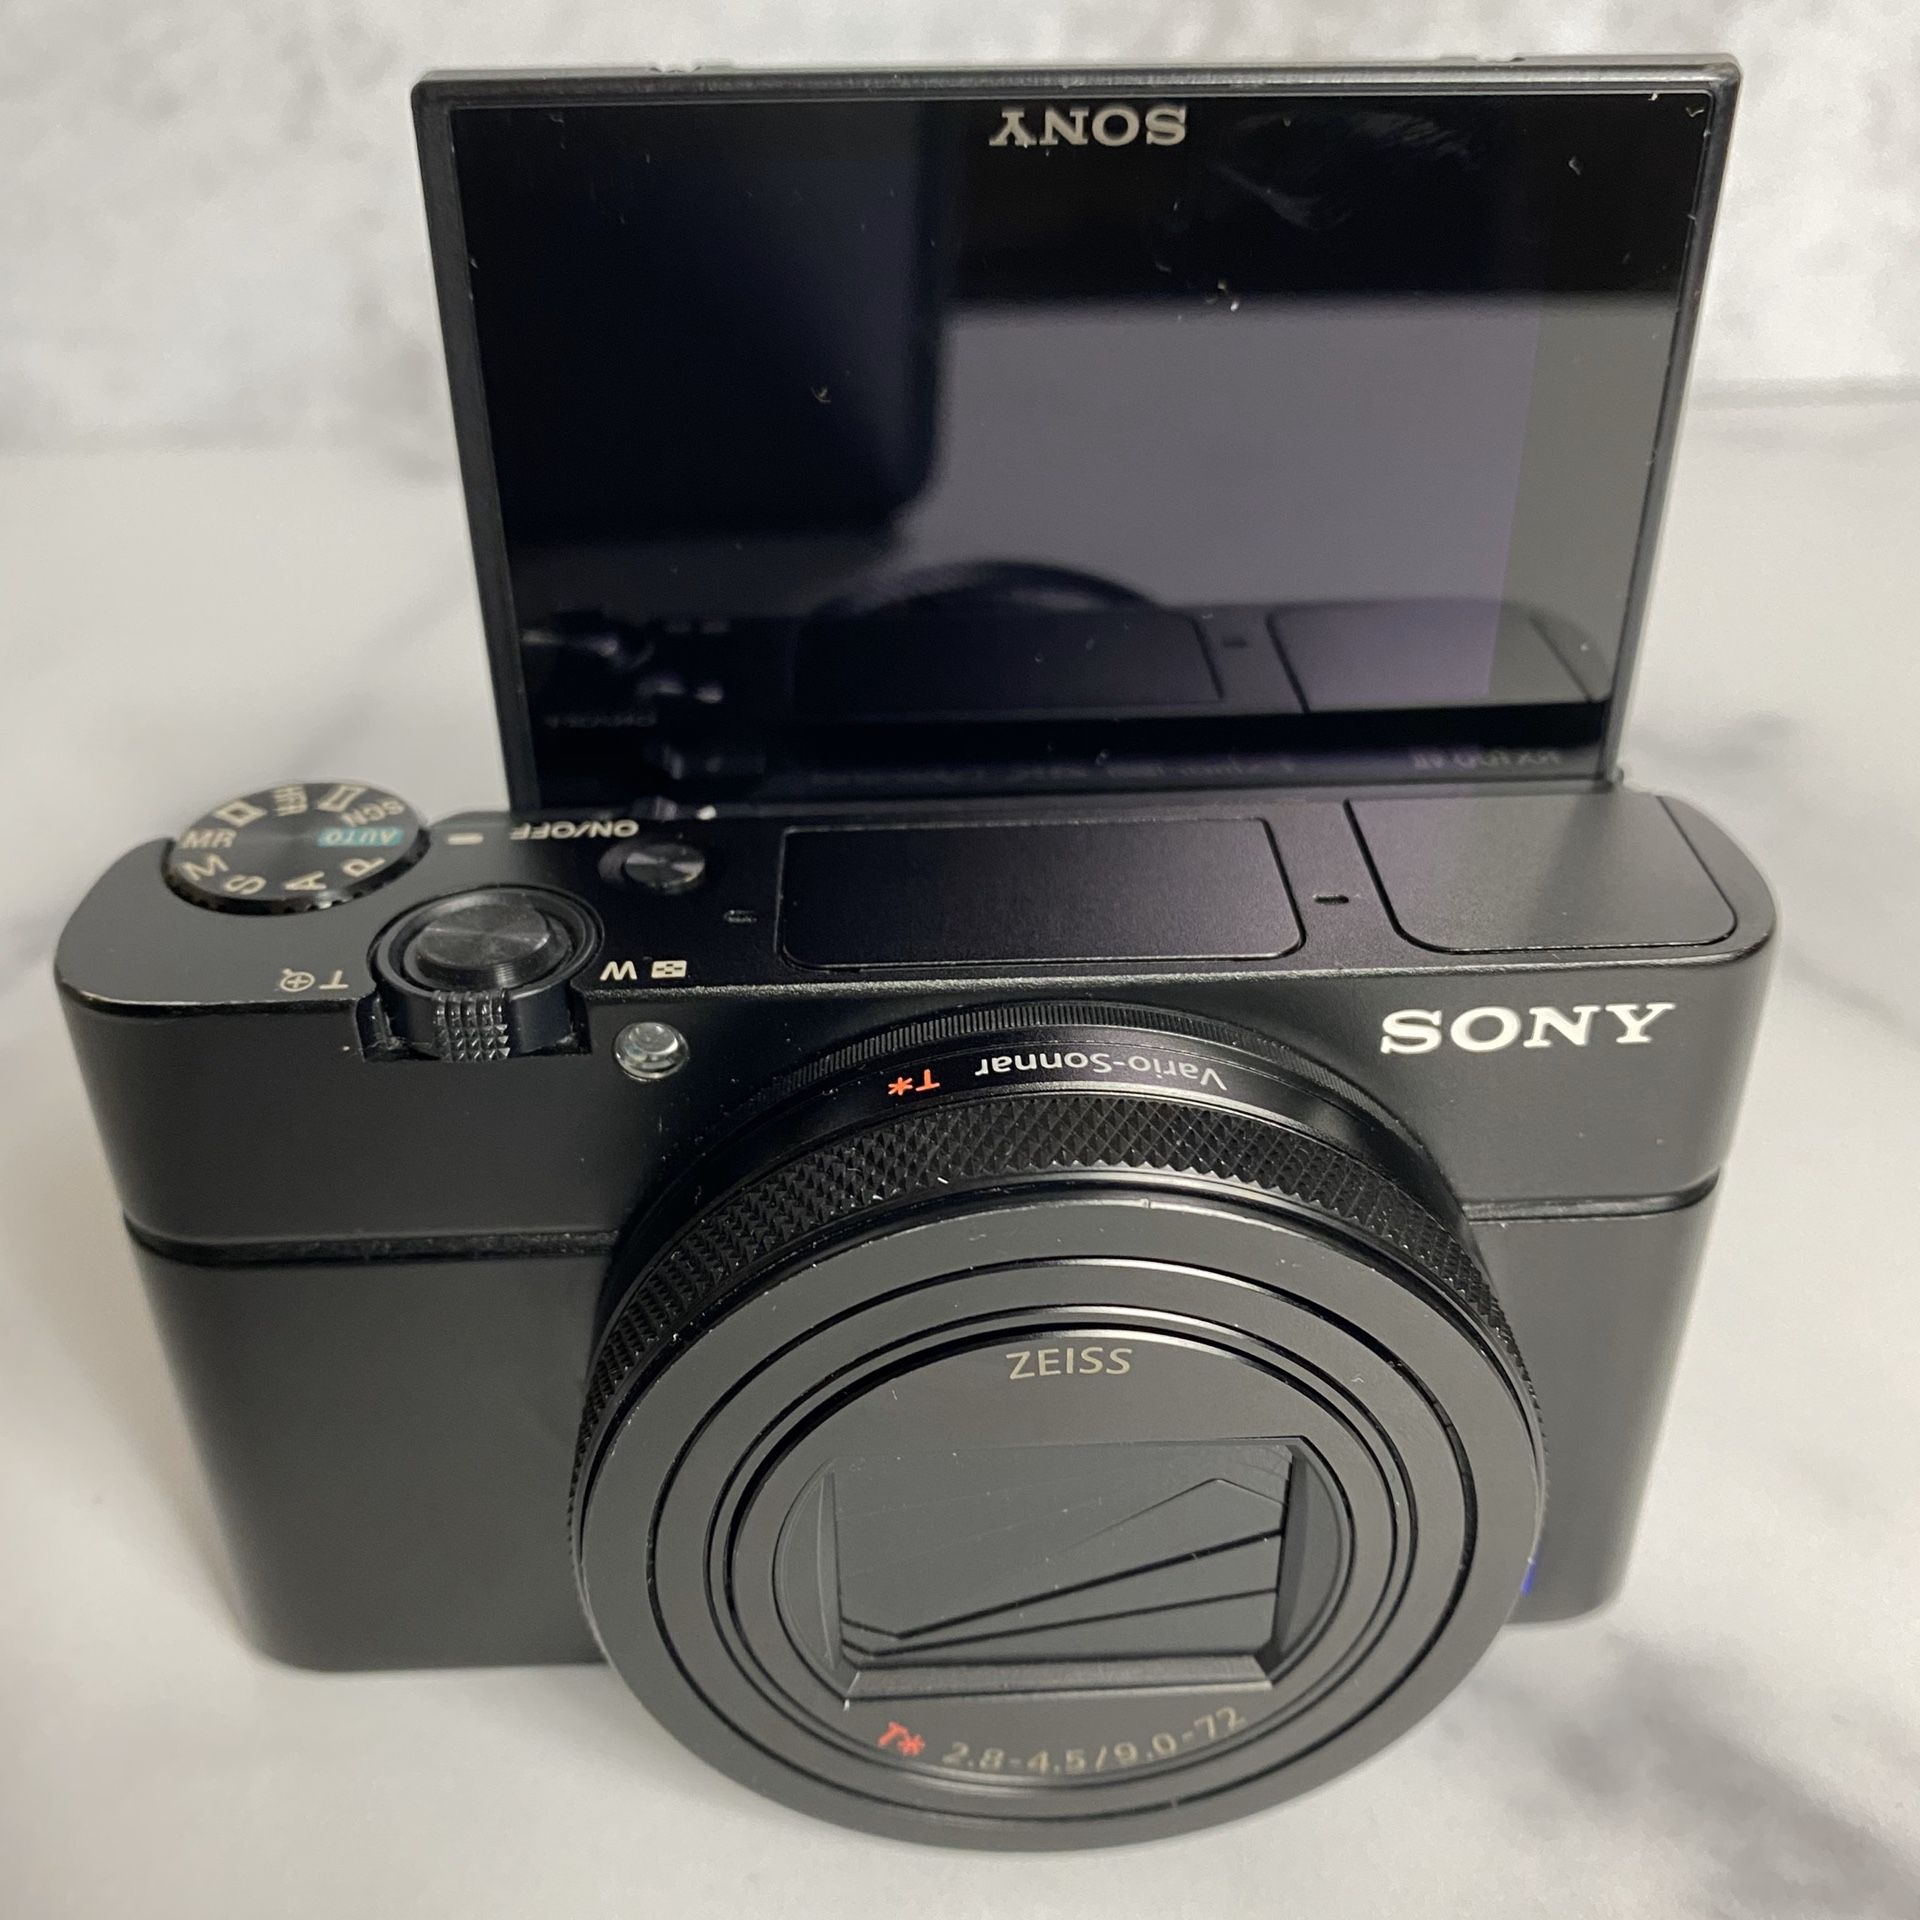 Sony rx100 Mark 7! mini Sony A9! Amazing pocket camera ! Best for all photography! 20.1MP 20fps